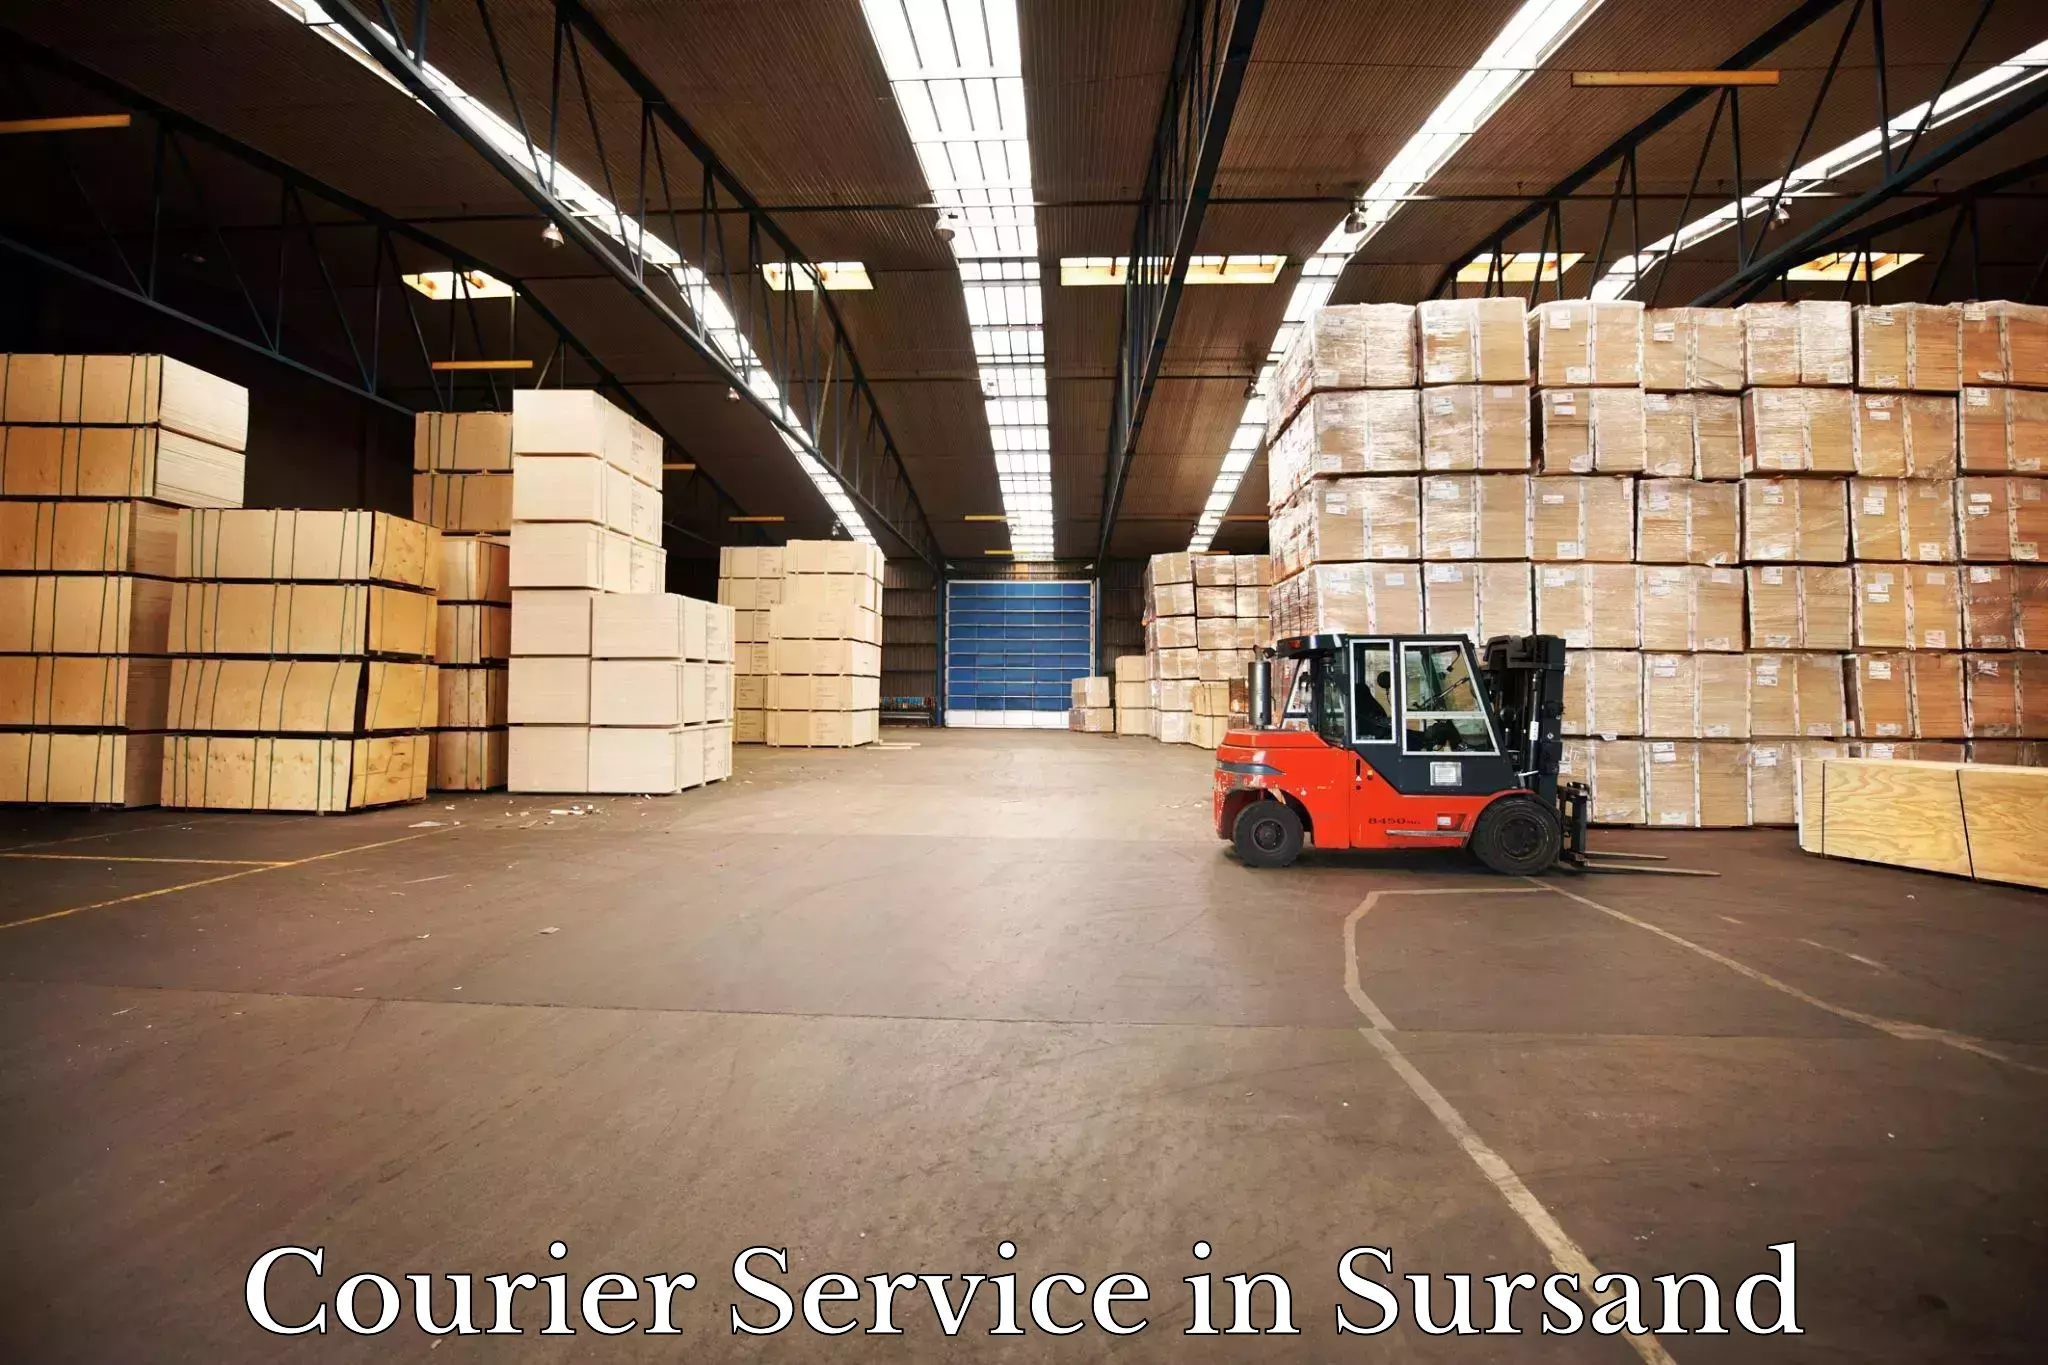 Small parcel delivery in Sursand